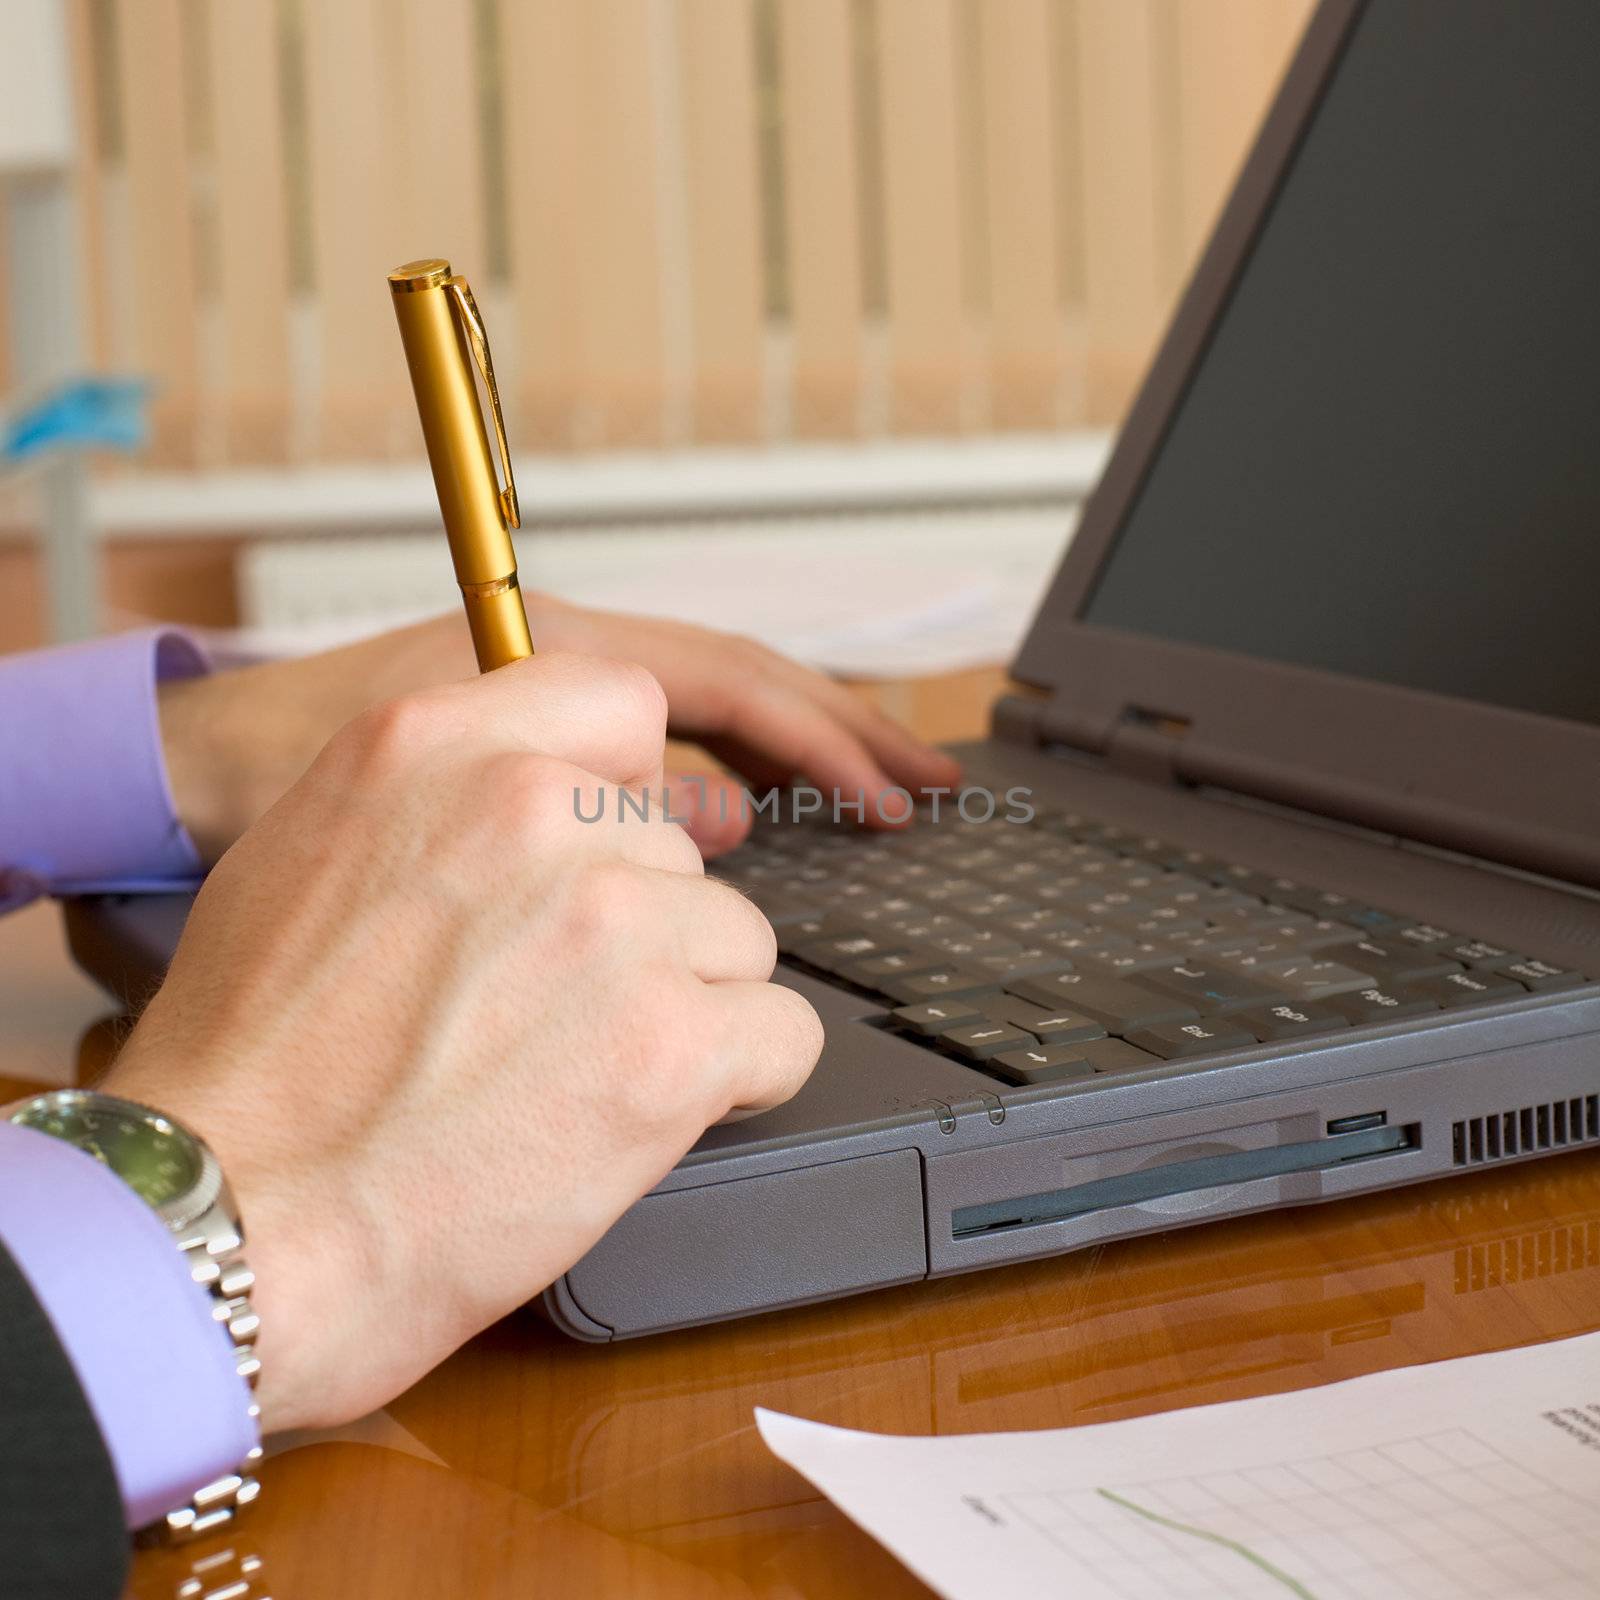 The laptop and man's hands with a pen